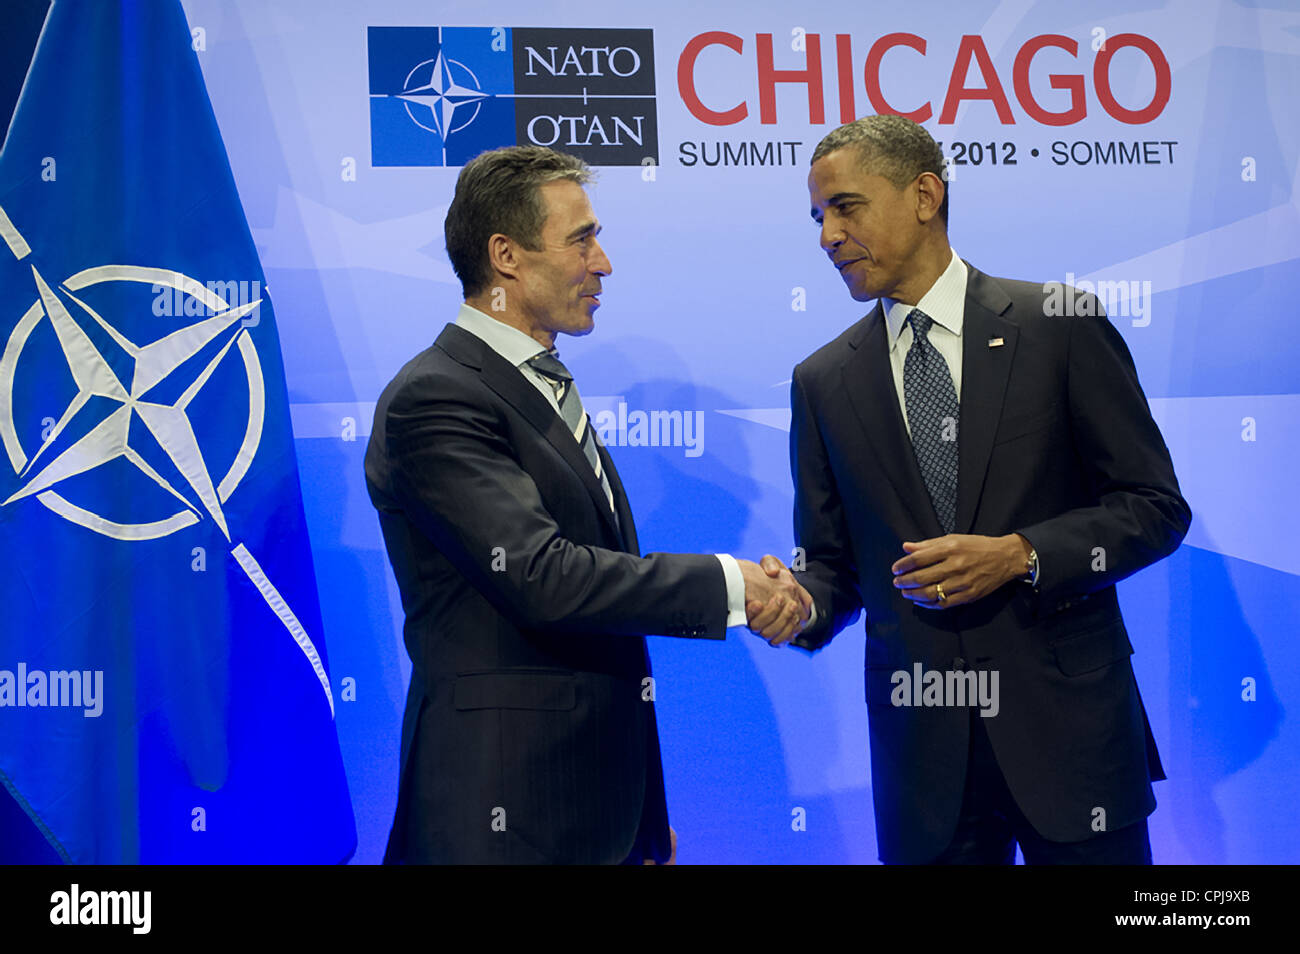 US President Barack Obama thanks NATO Secretary General Anders Fogh Rasmussen at the opening of the NATO Summit at the McCormick Place Convention Center May 20, 2012 in Chicago, Illinois. NATO leaders reached agreement on ending combat operations in Afghanistan. Stock Photo